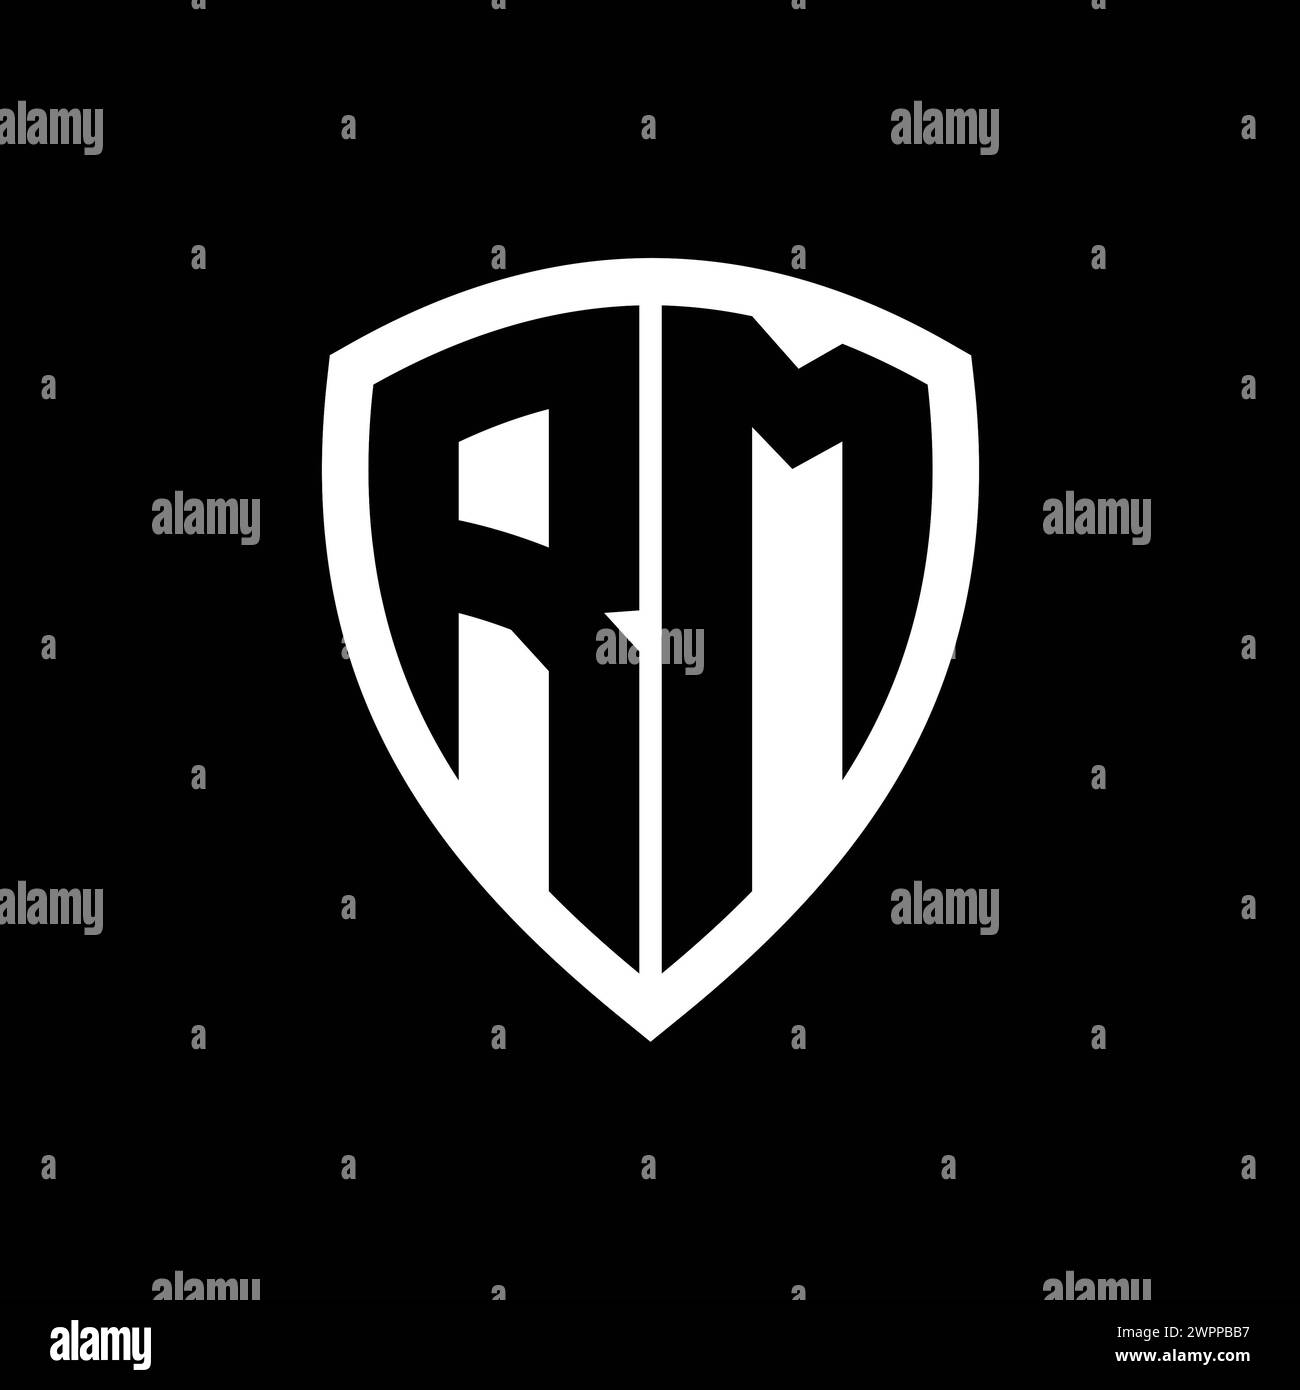 RM monogram logo with bold letters shield shape with black and white color design template Stock Photo